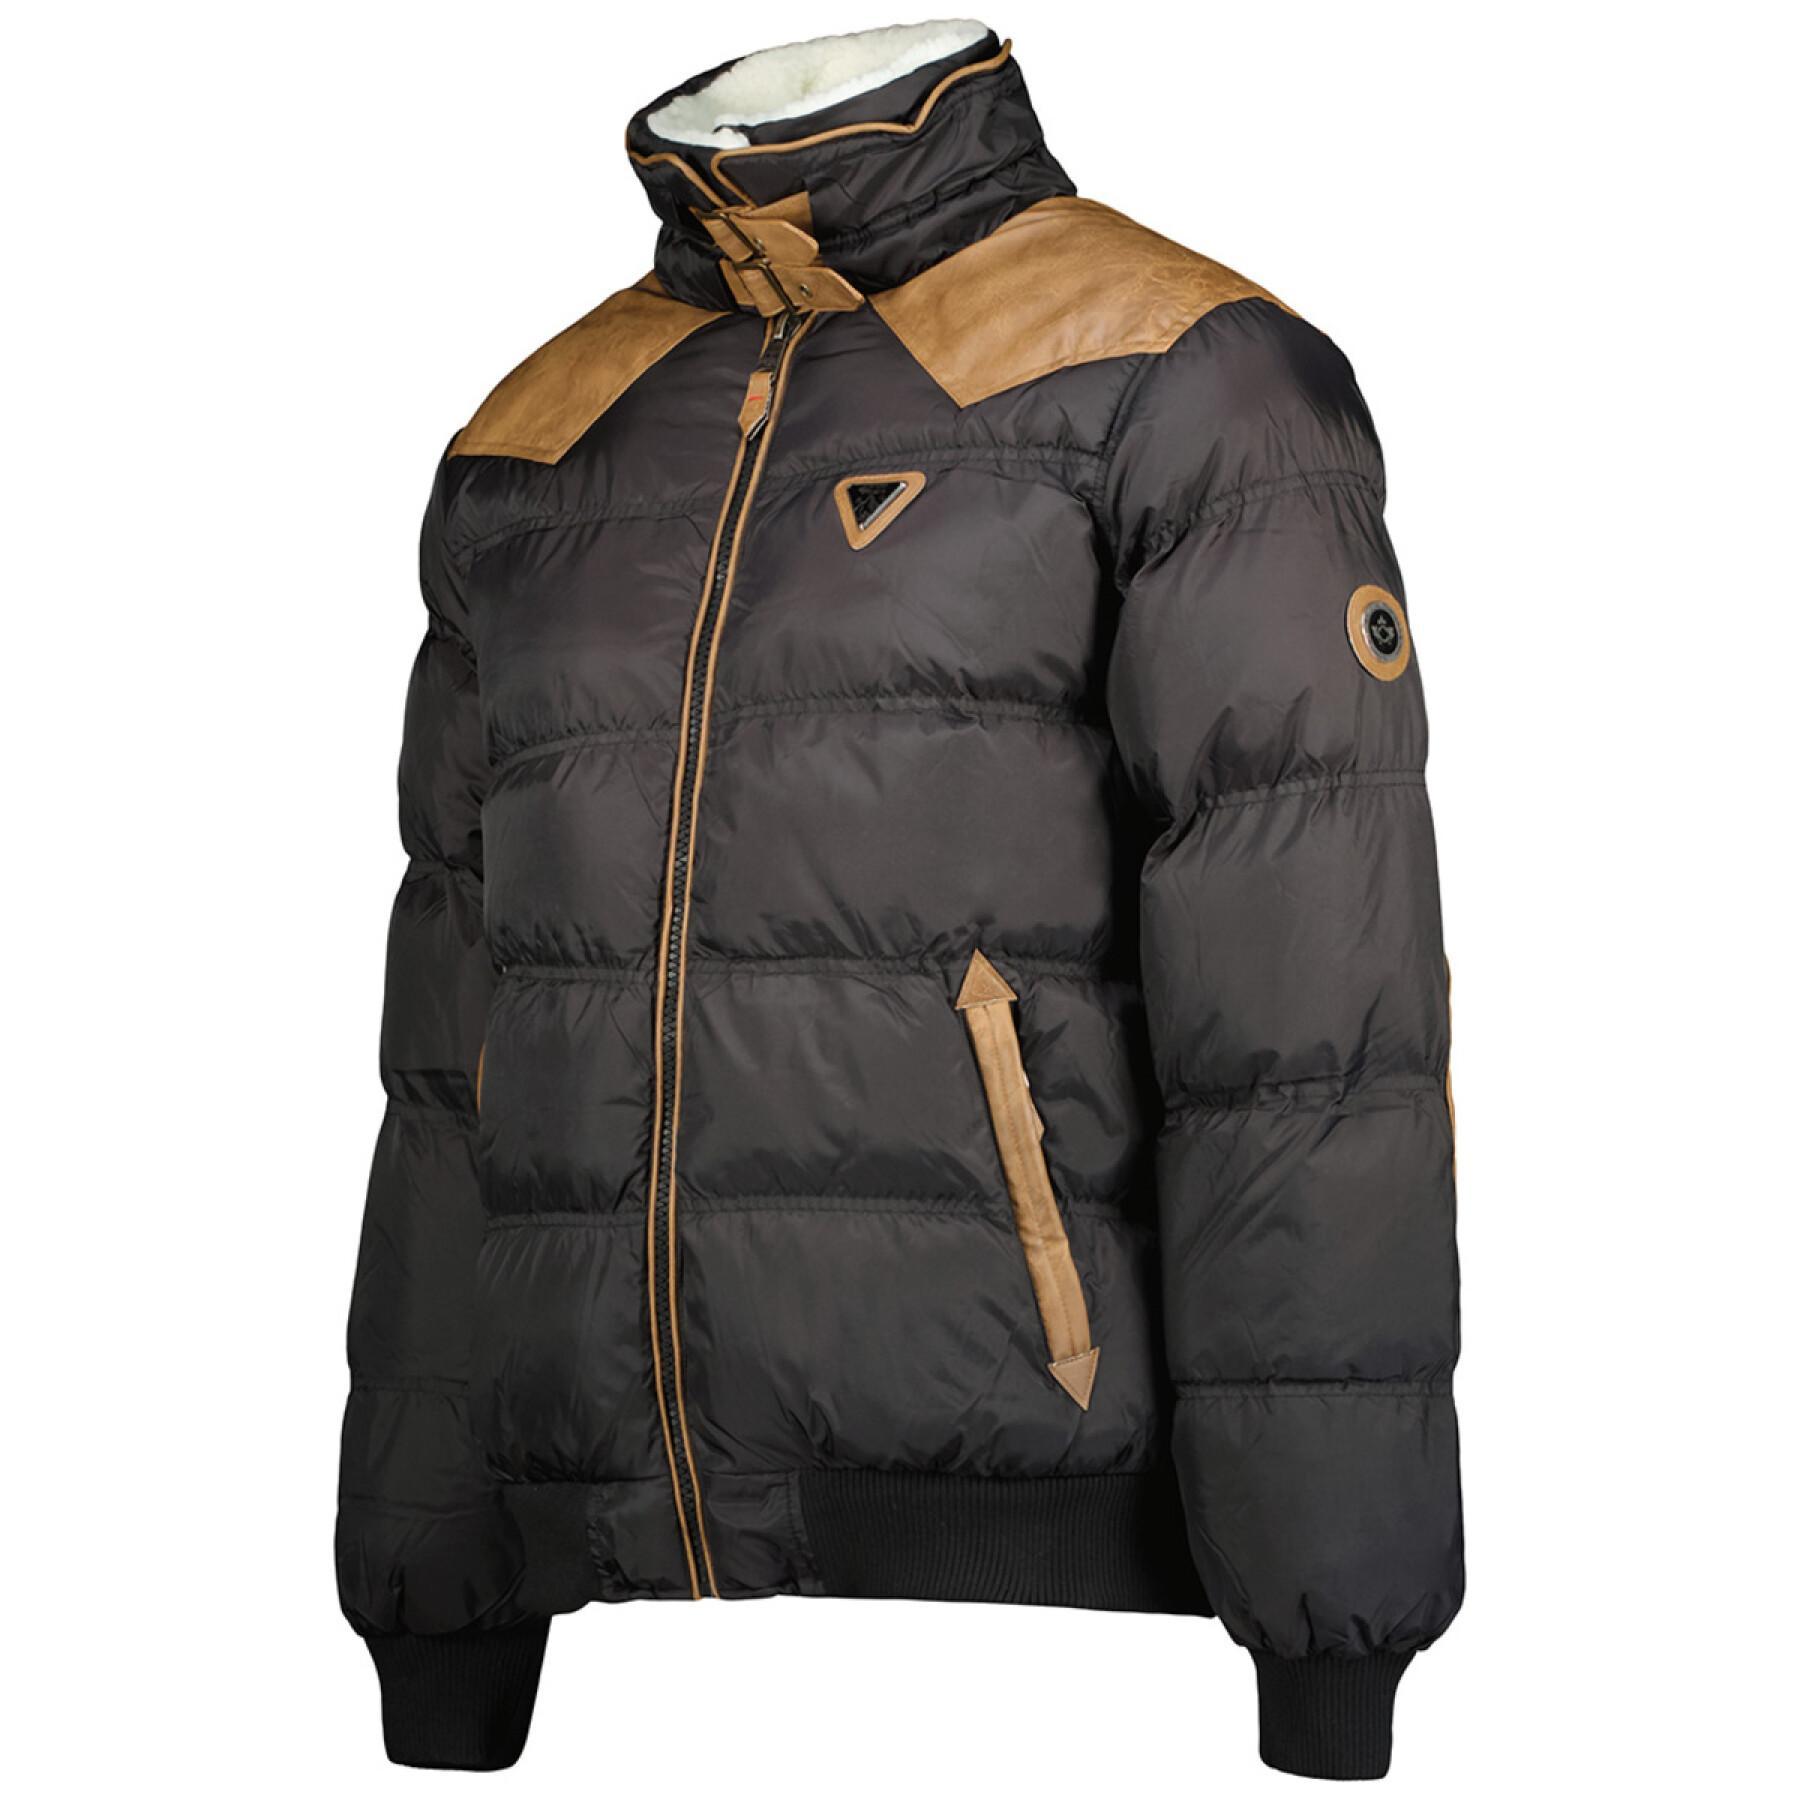 Down jacket Canadian Peak Barillo Bs Cp